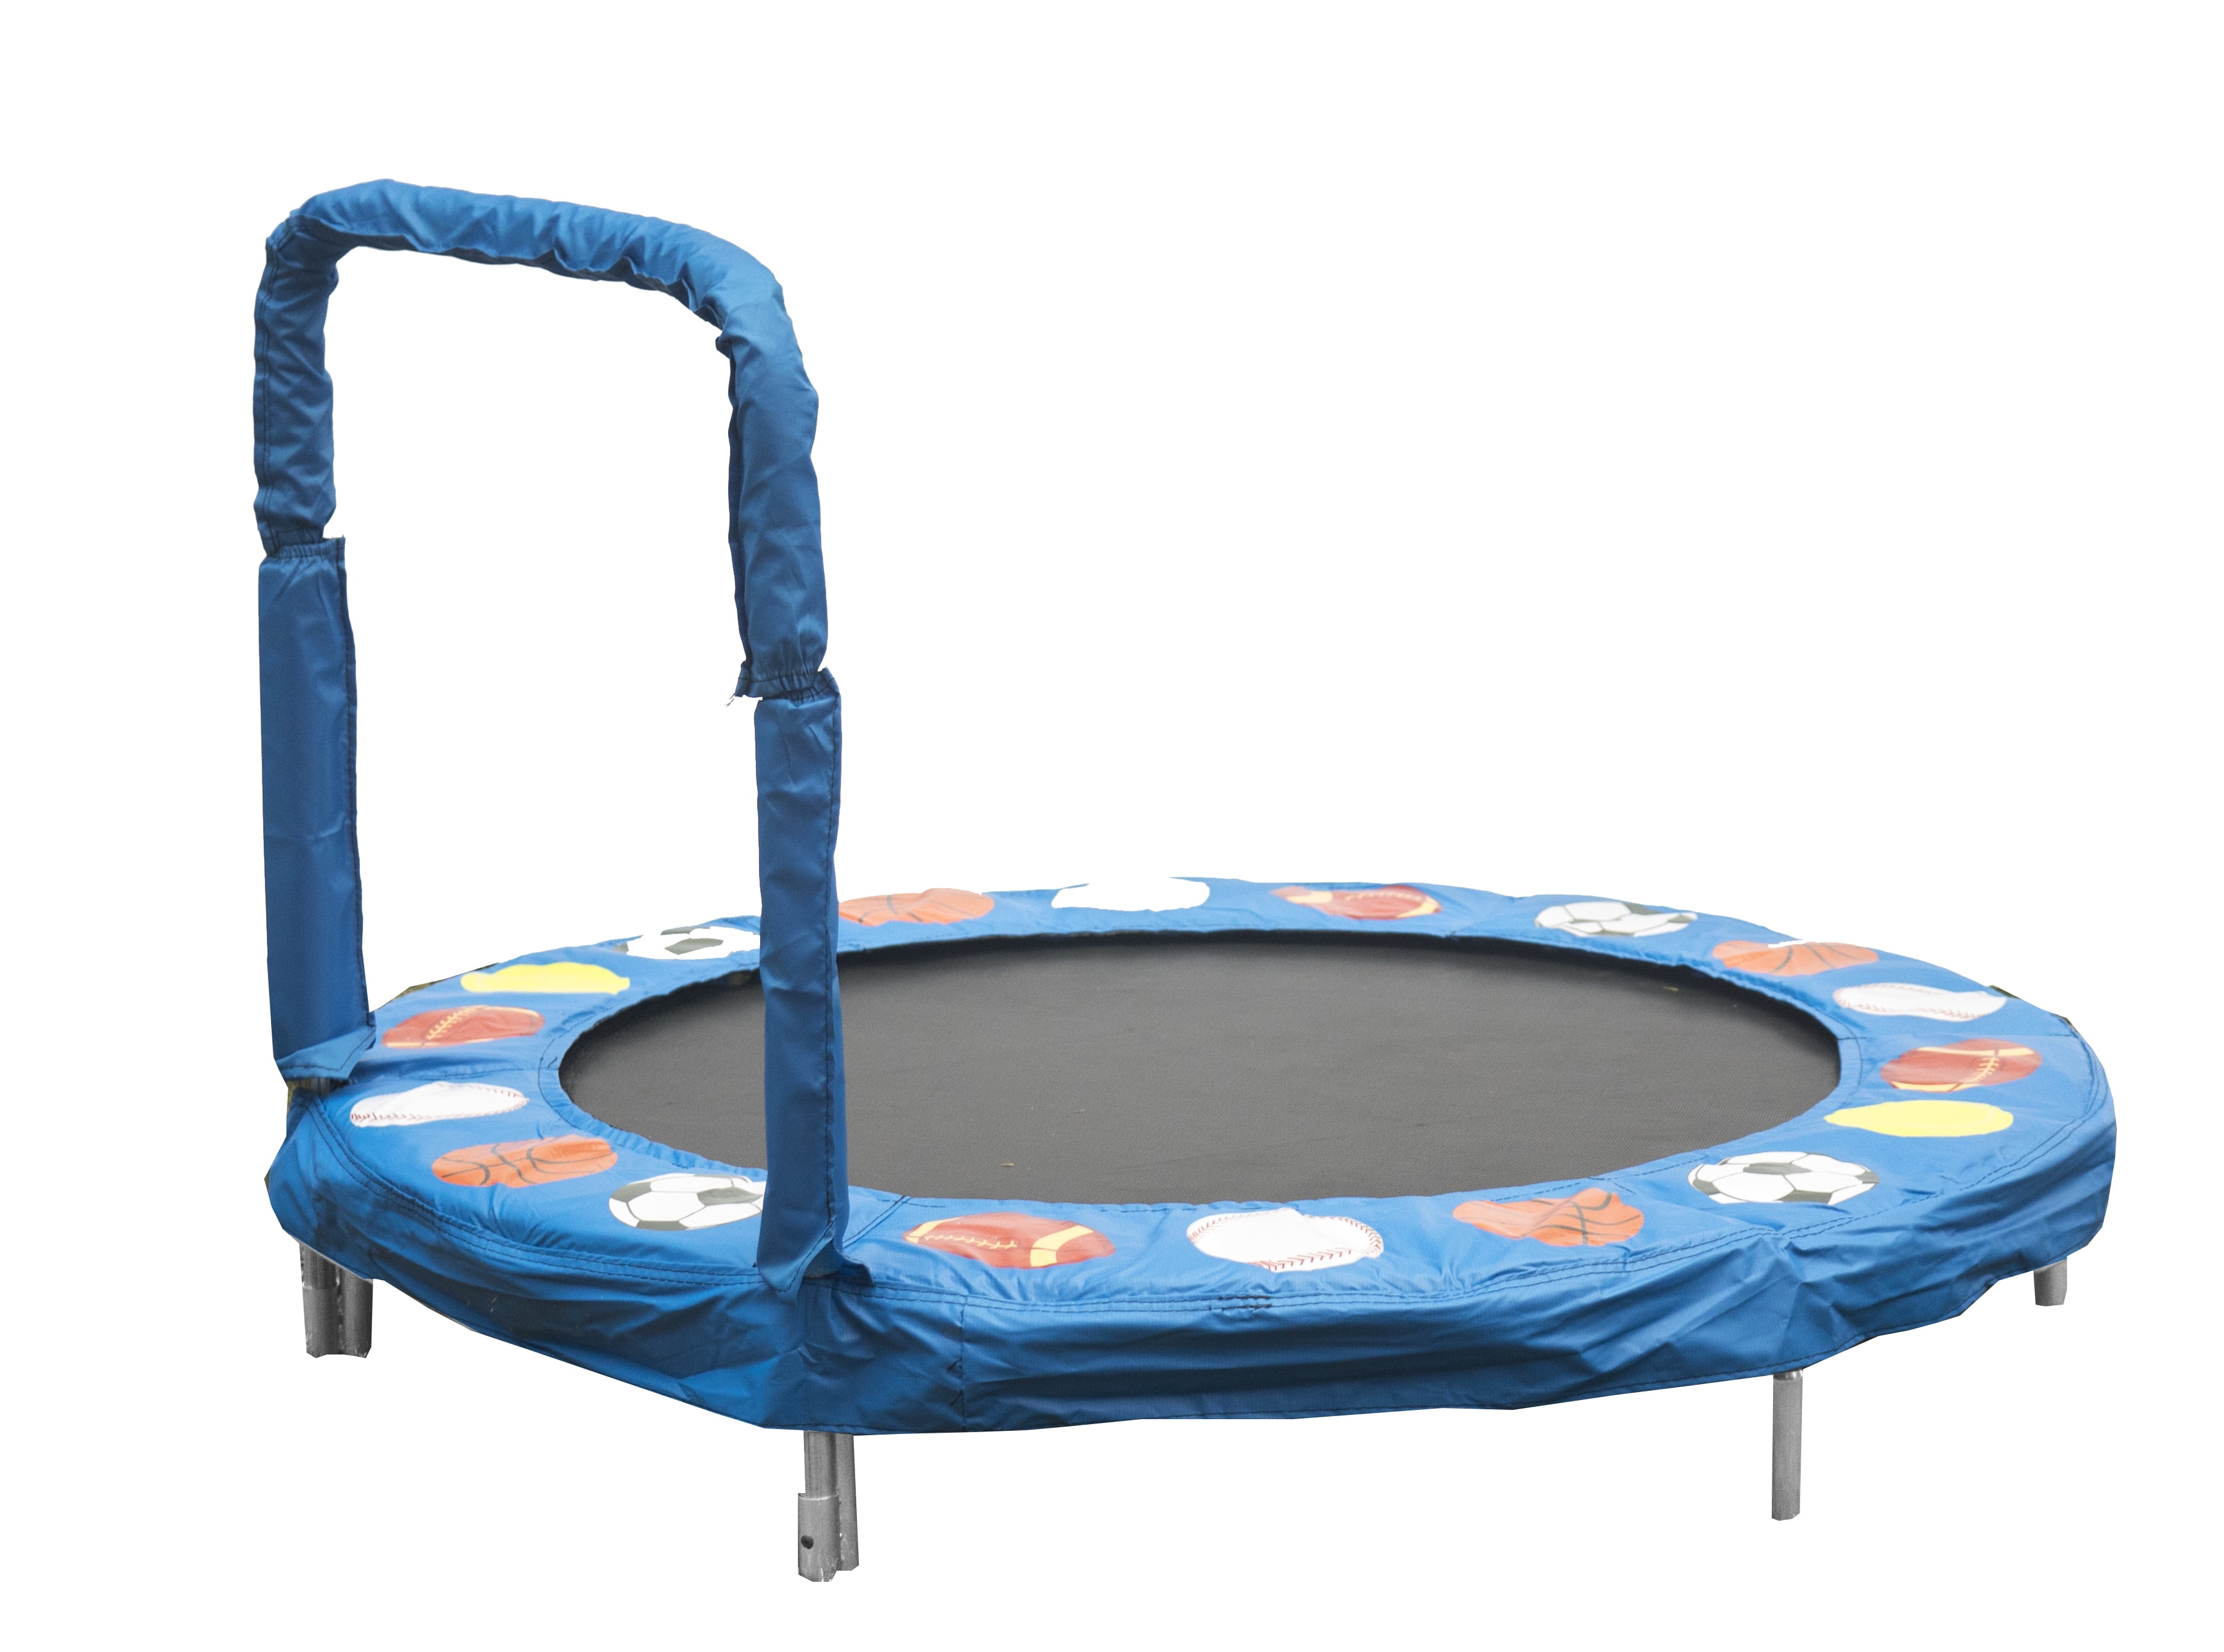 Trampoline 4 Bouncer for Kids by Jumpking 